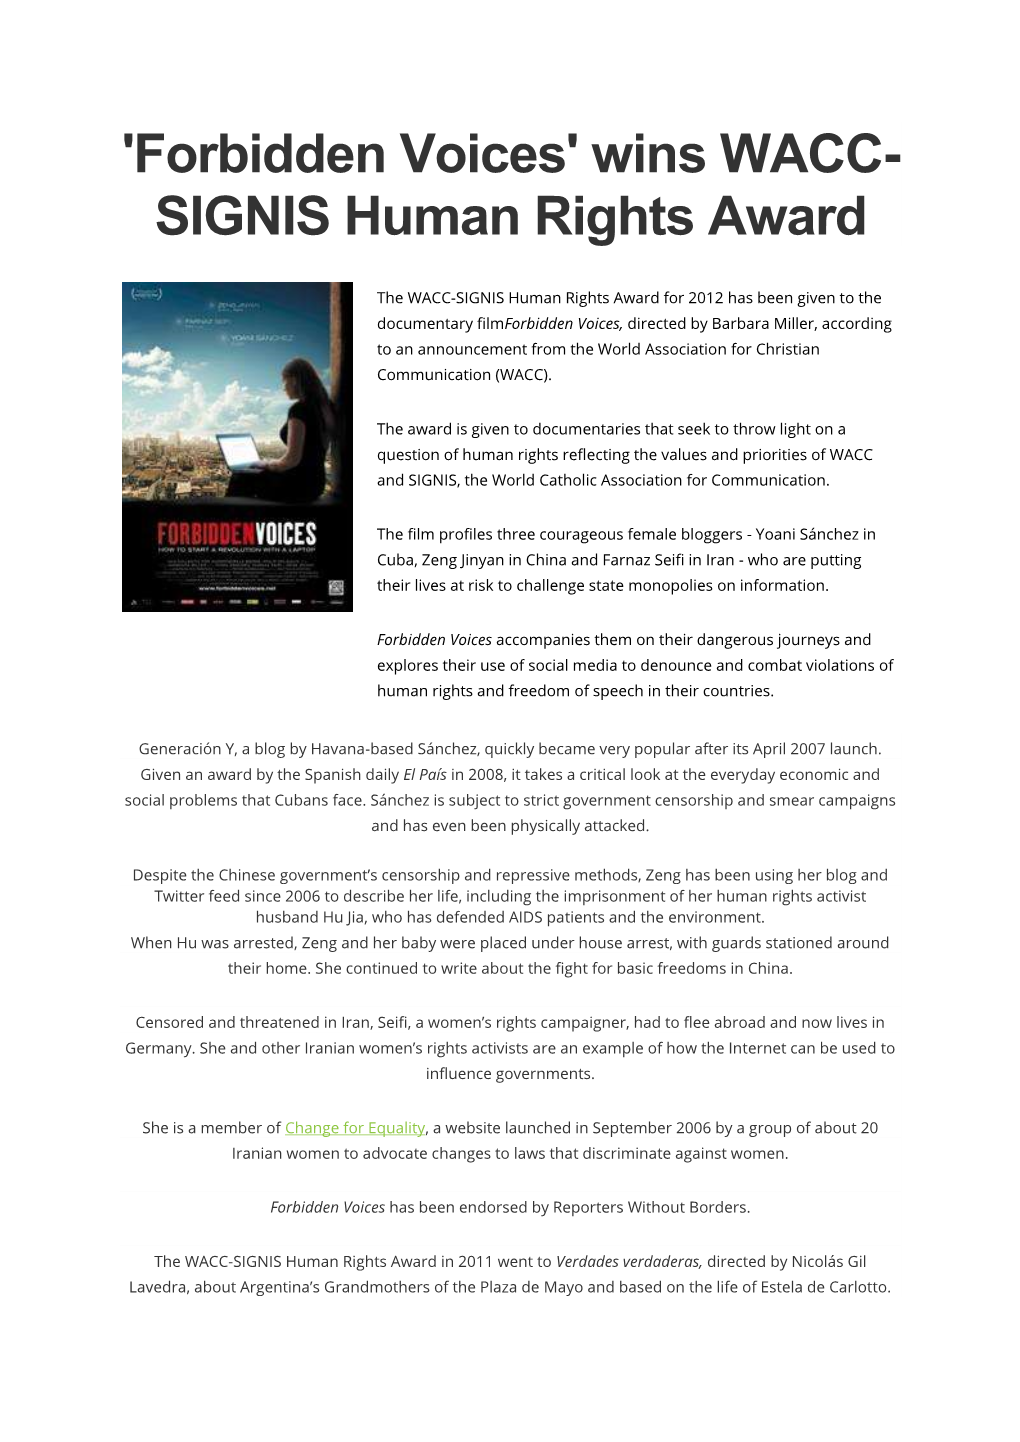 'Forbidden Voices' Wins WACC- SIGNIS Human Rights Award